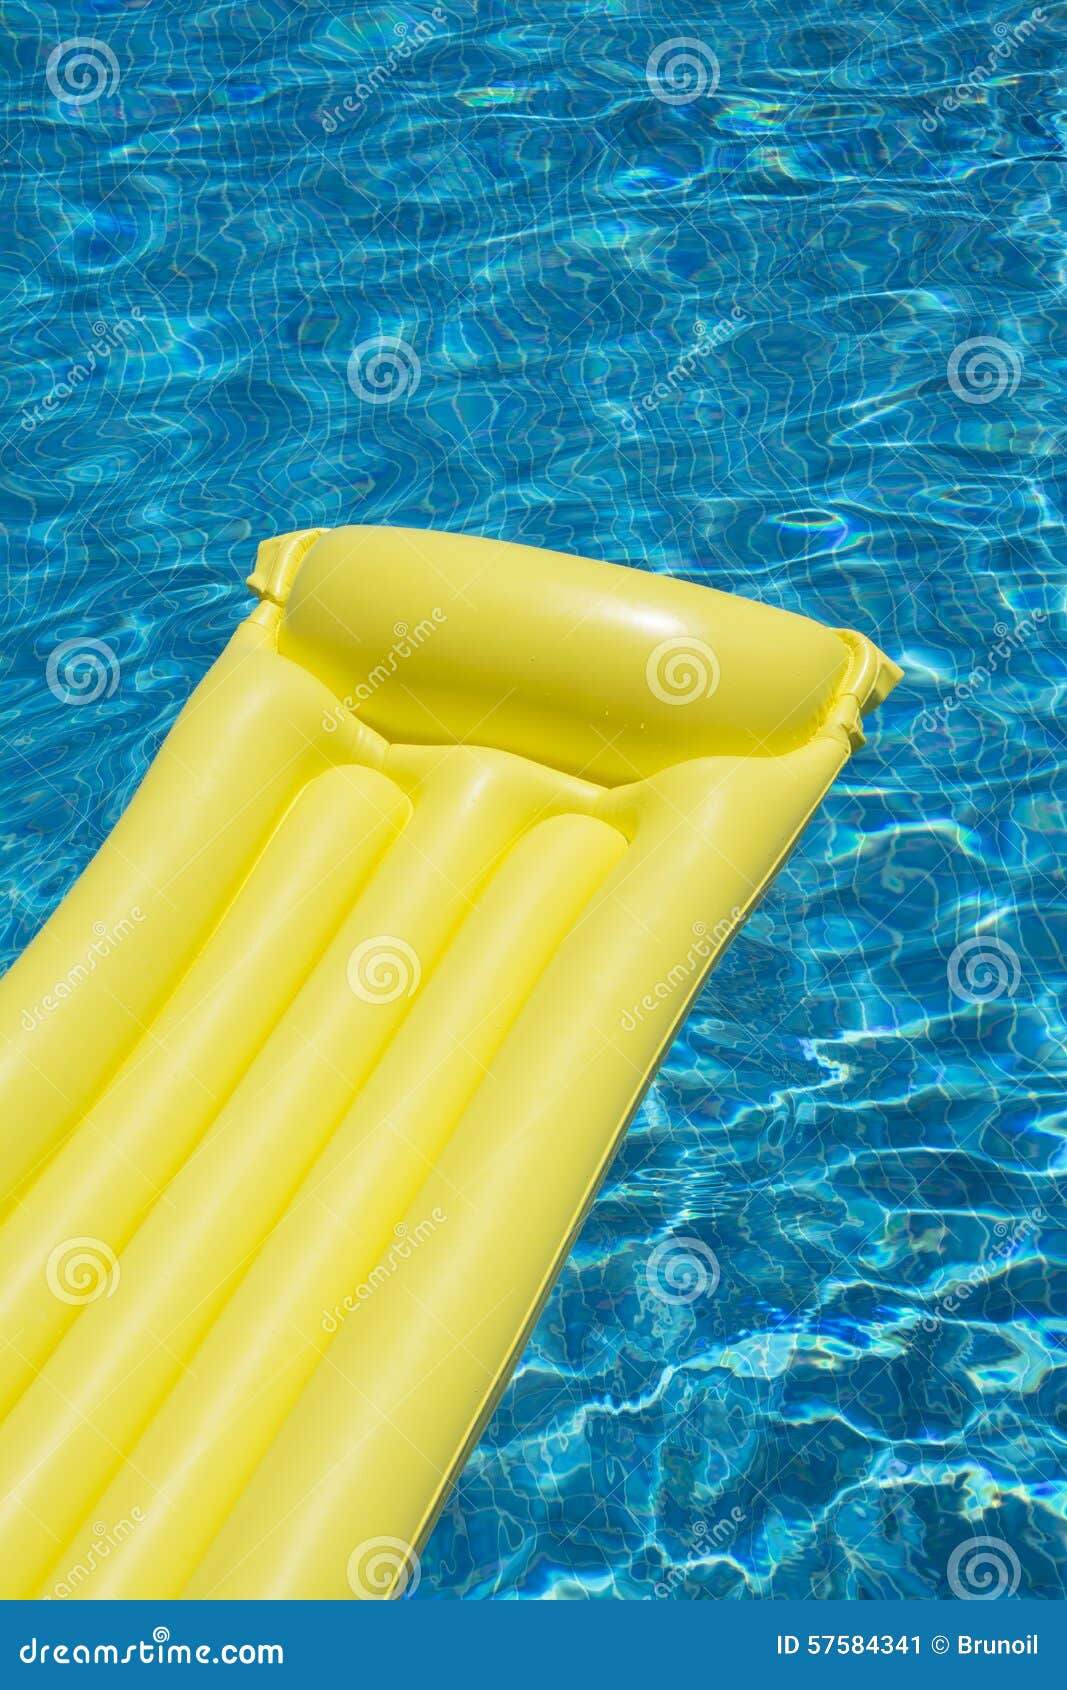 Mattress in Swimming Pool stock image. Image of photograph - 57584341